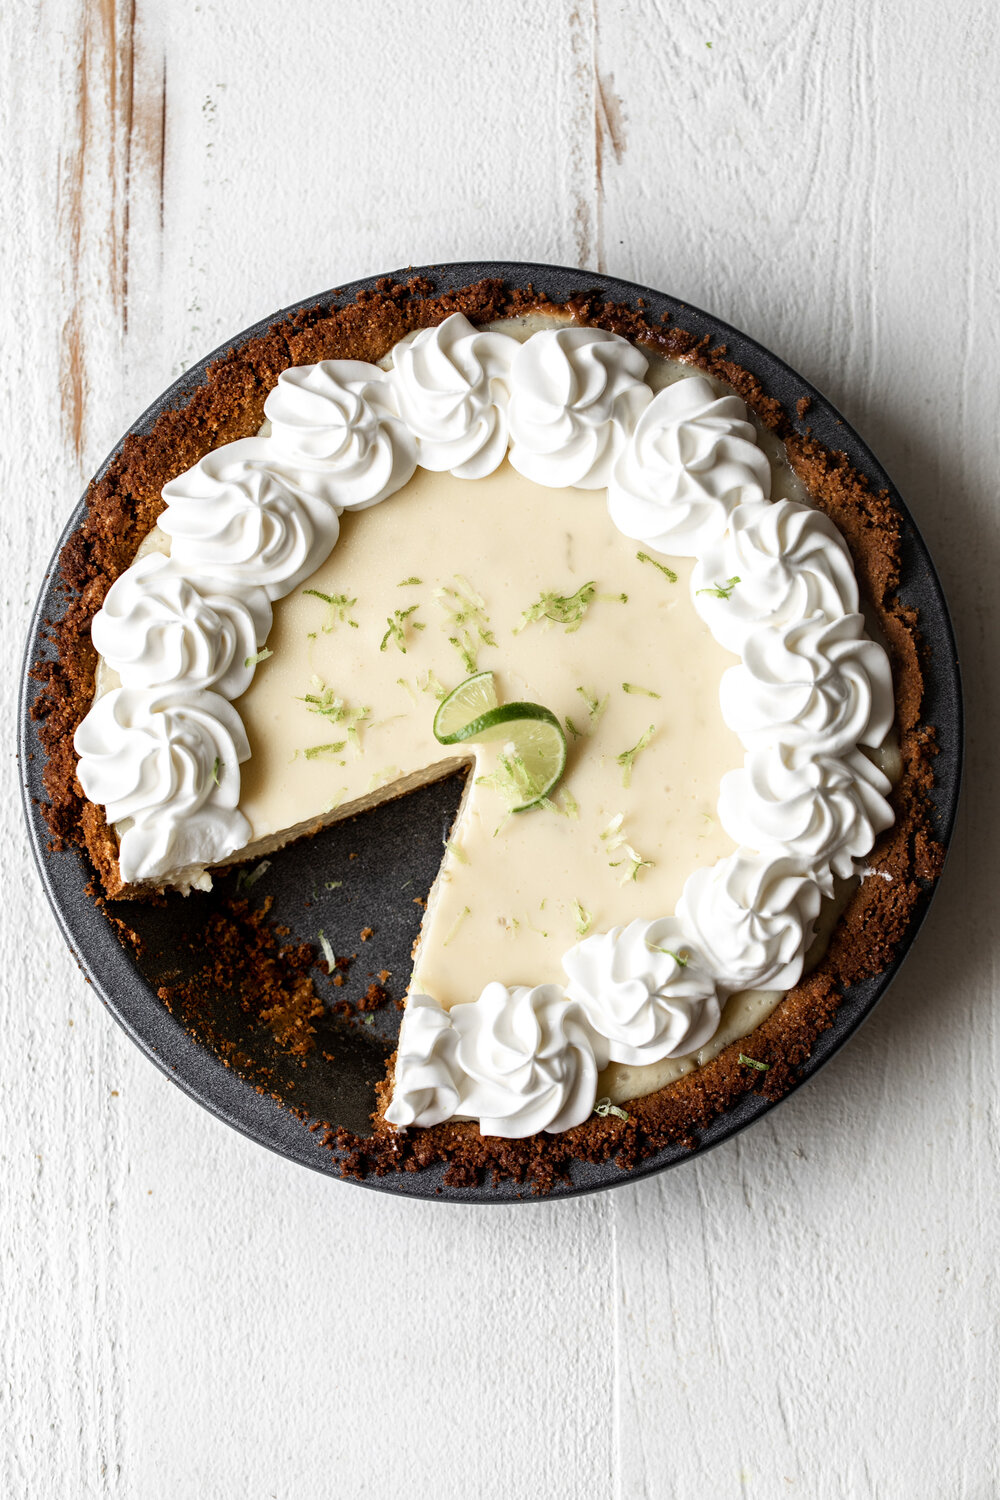 key lime pie with slice removed